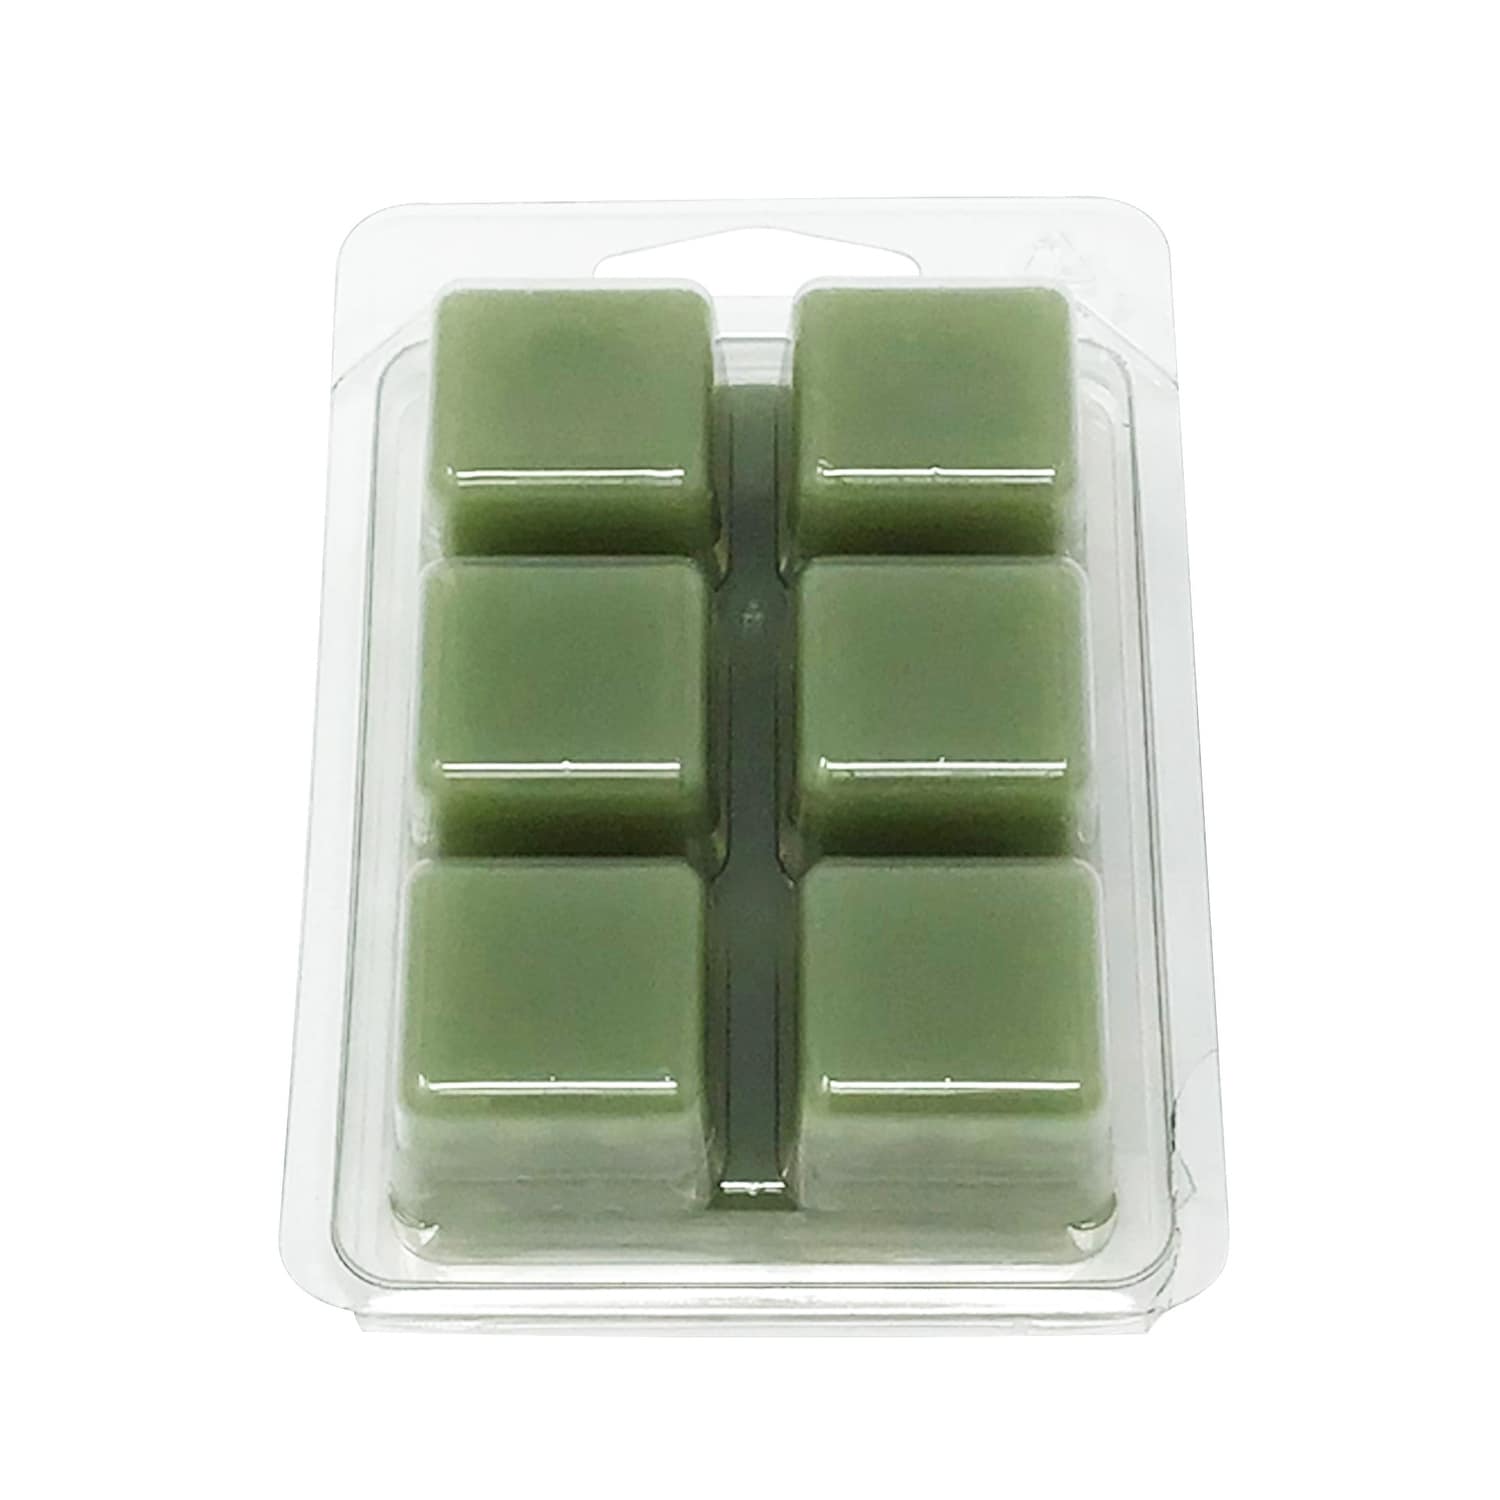 Scentsationals 5 oz Perfectly Pine Scented Wax Melts, Value Size